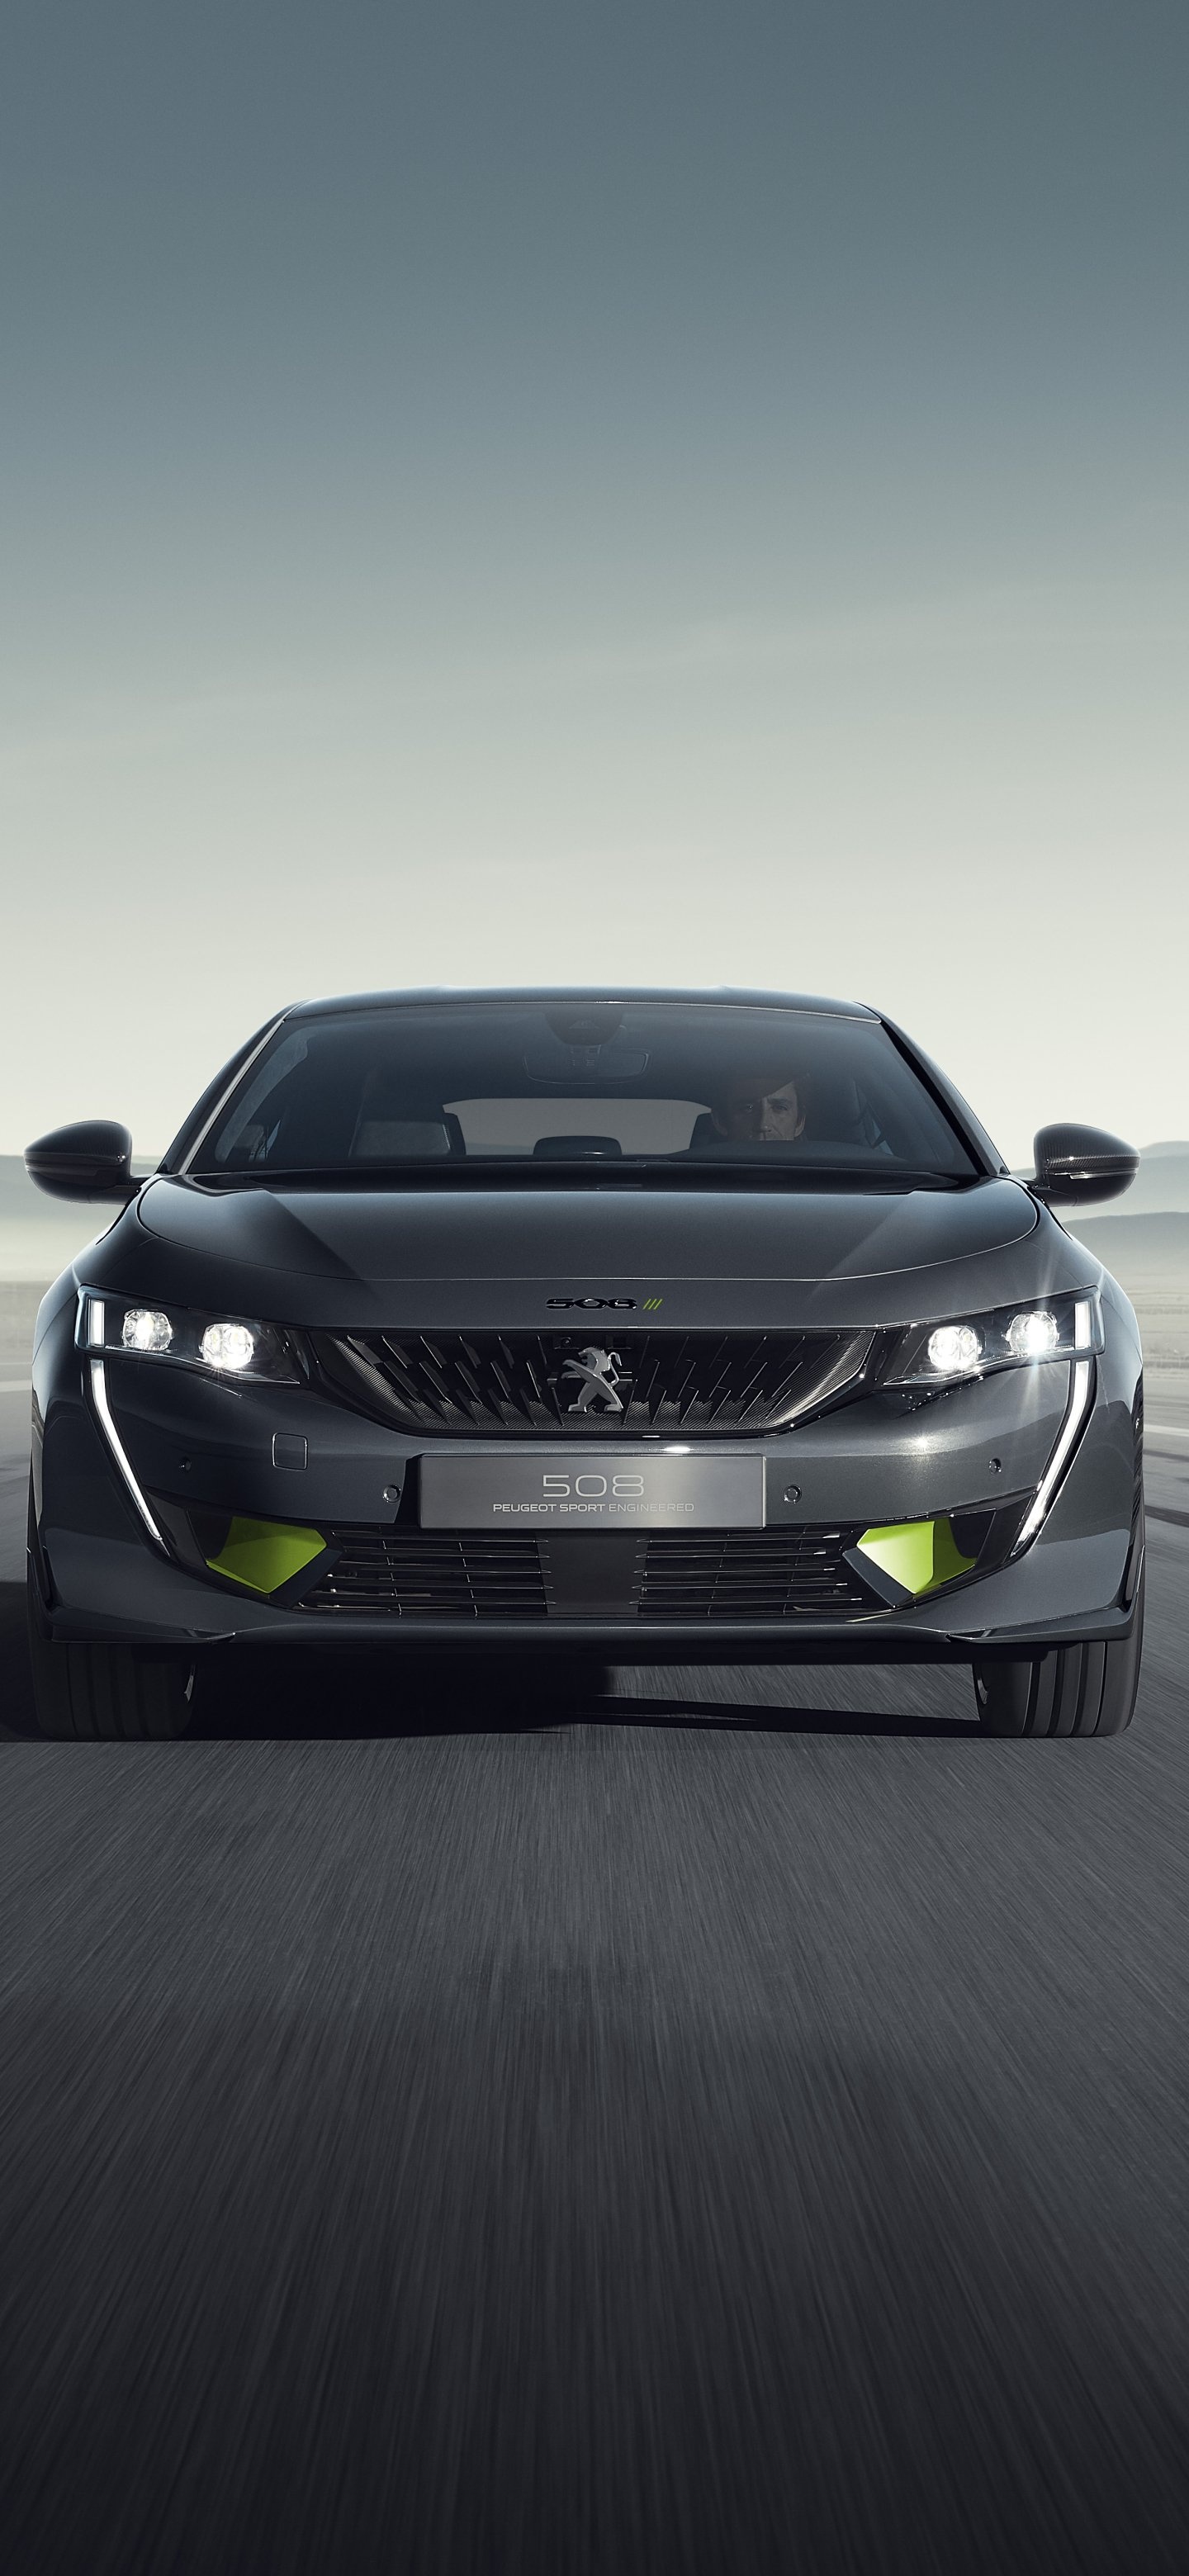 Peugeot 508, Stylish vehicle, Sophisticated design, Automotive excellence, 1440x3120 HD Handy